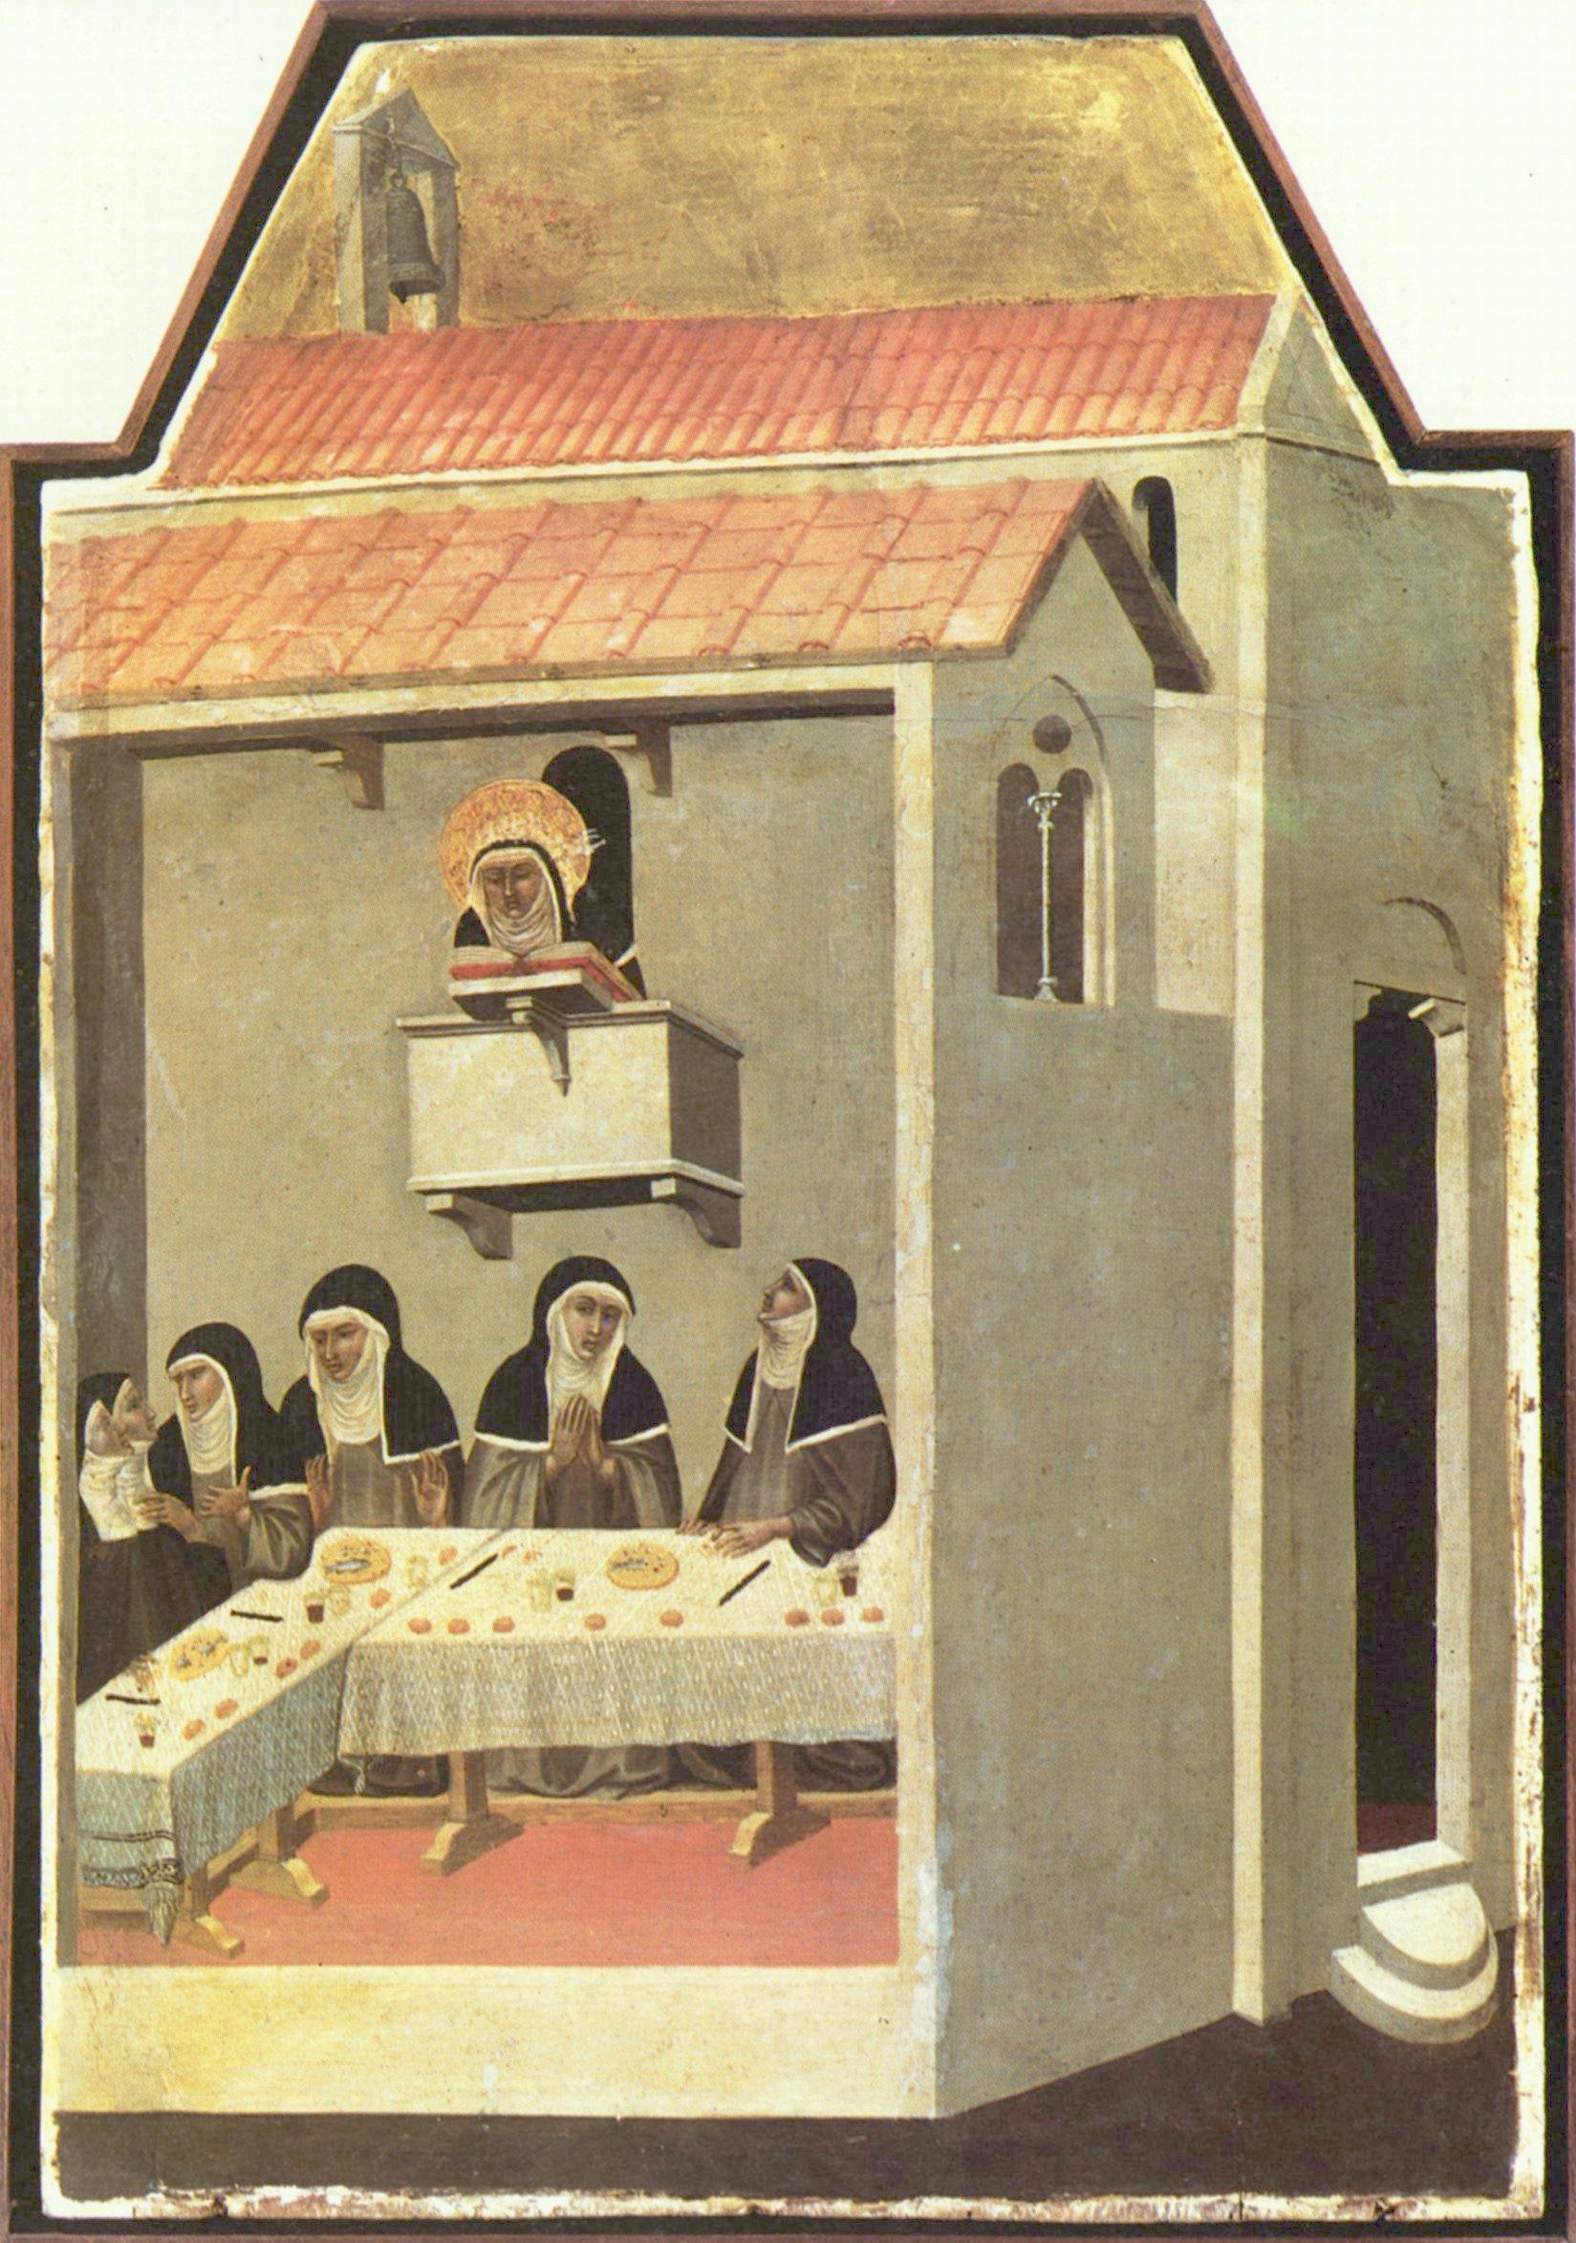 Scene from the life of Saint Humility (c. 1226 – 1310)